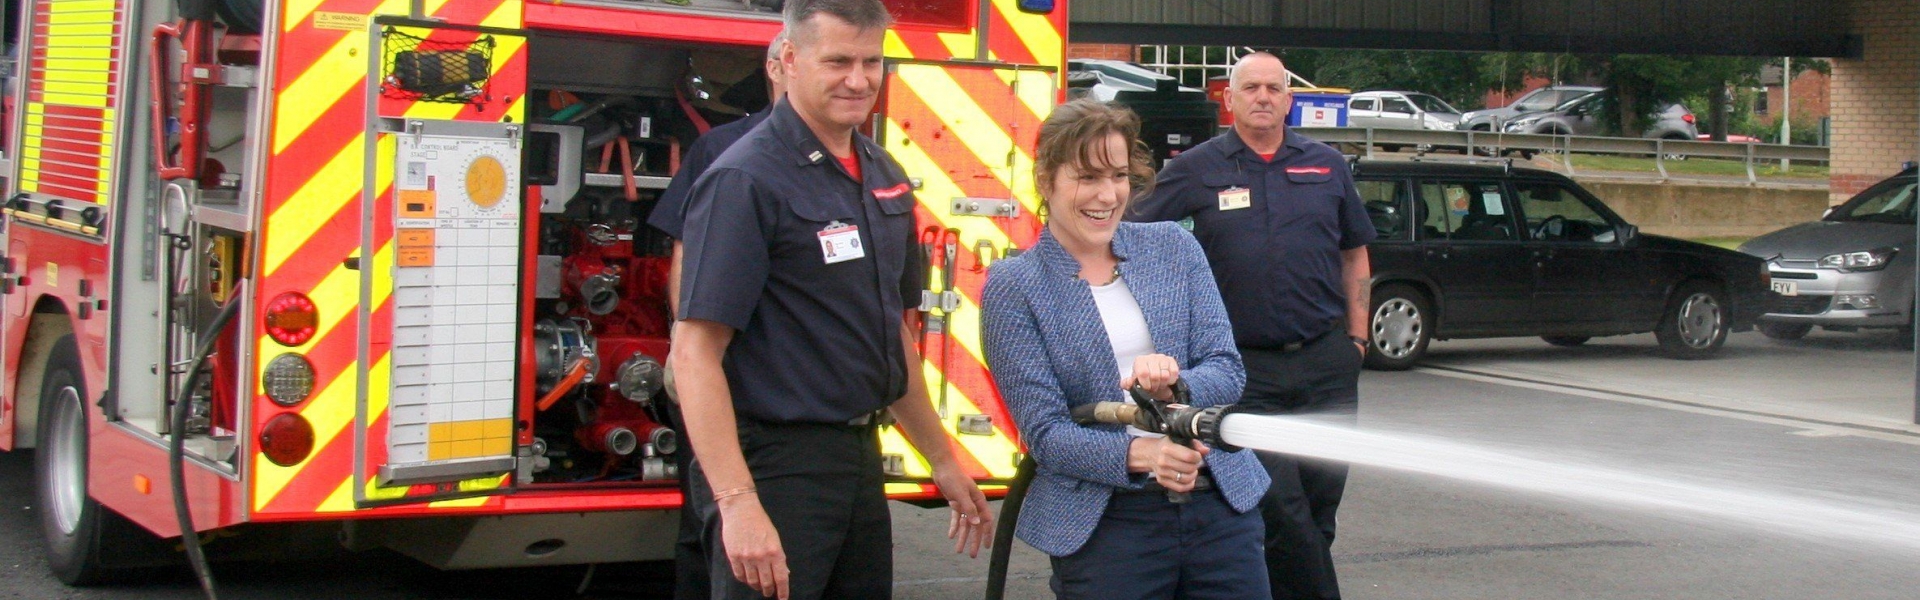 Victoria Atkins MP Louth Fire Station